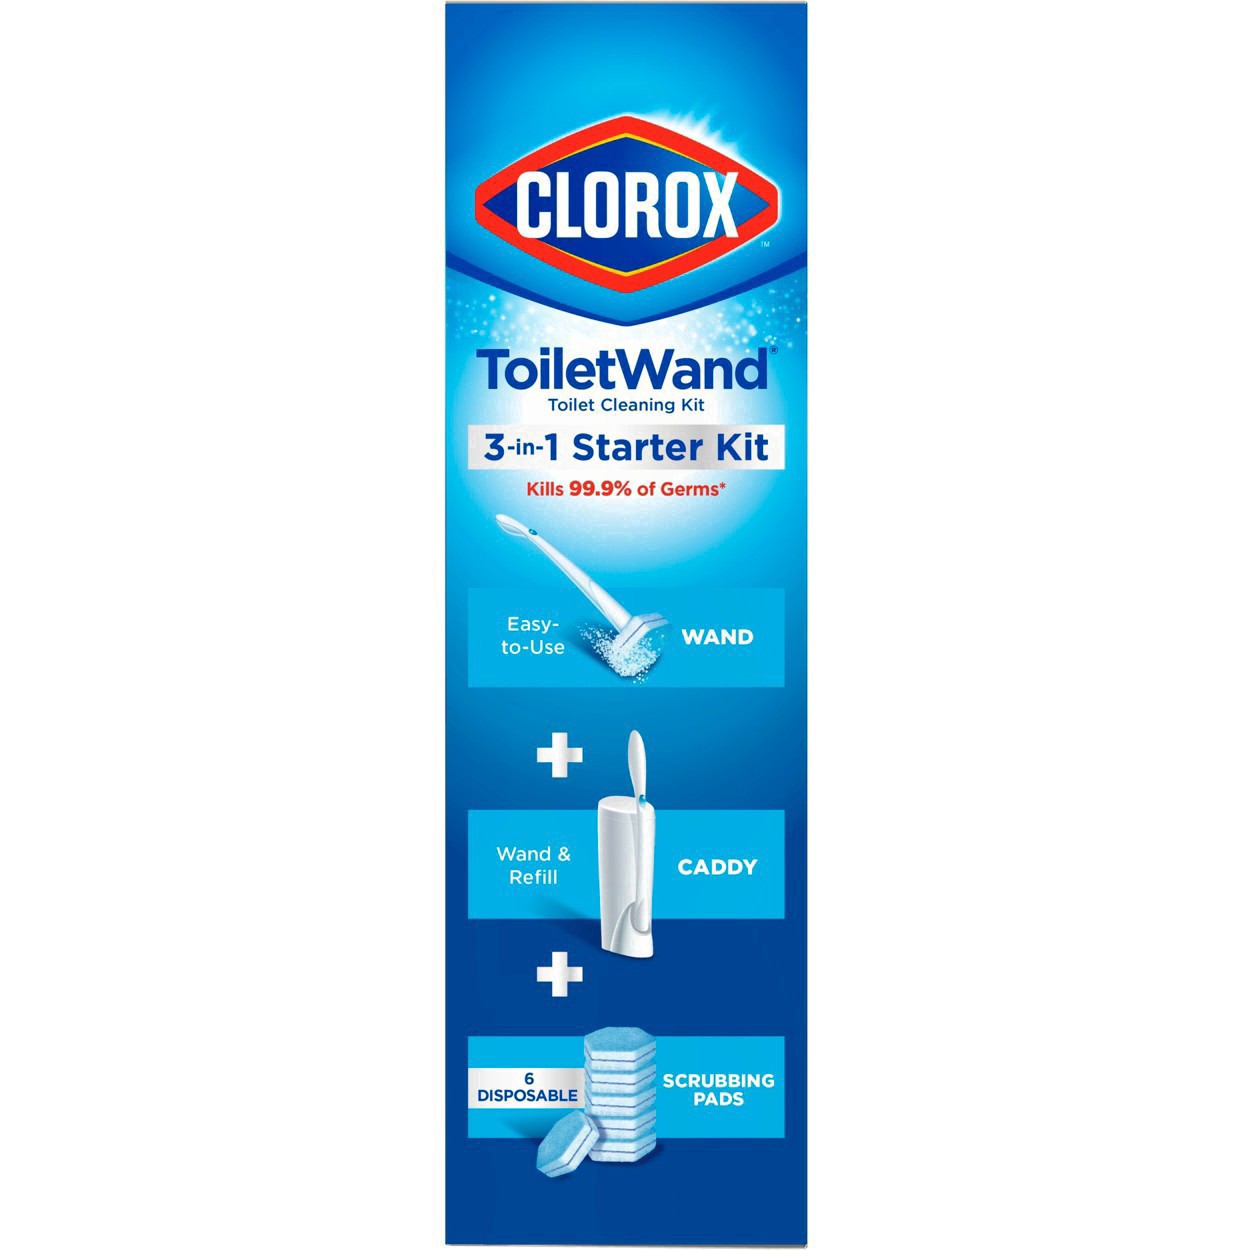 slide 34 of 176, Clorox Toilet Wand 3-in-1 Starter Toliet Cleaning Kit, 1 ct